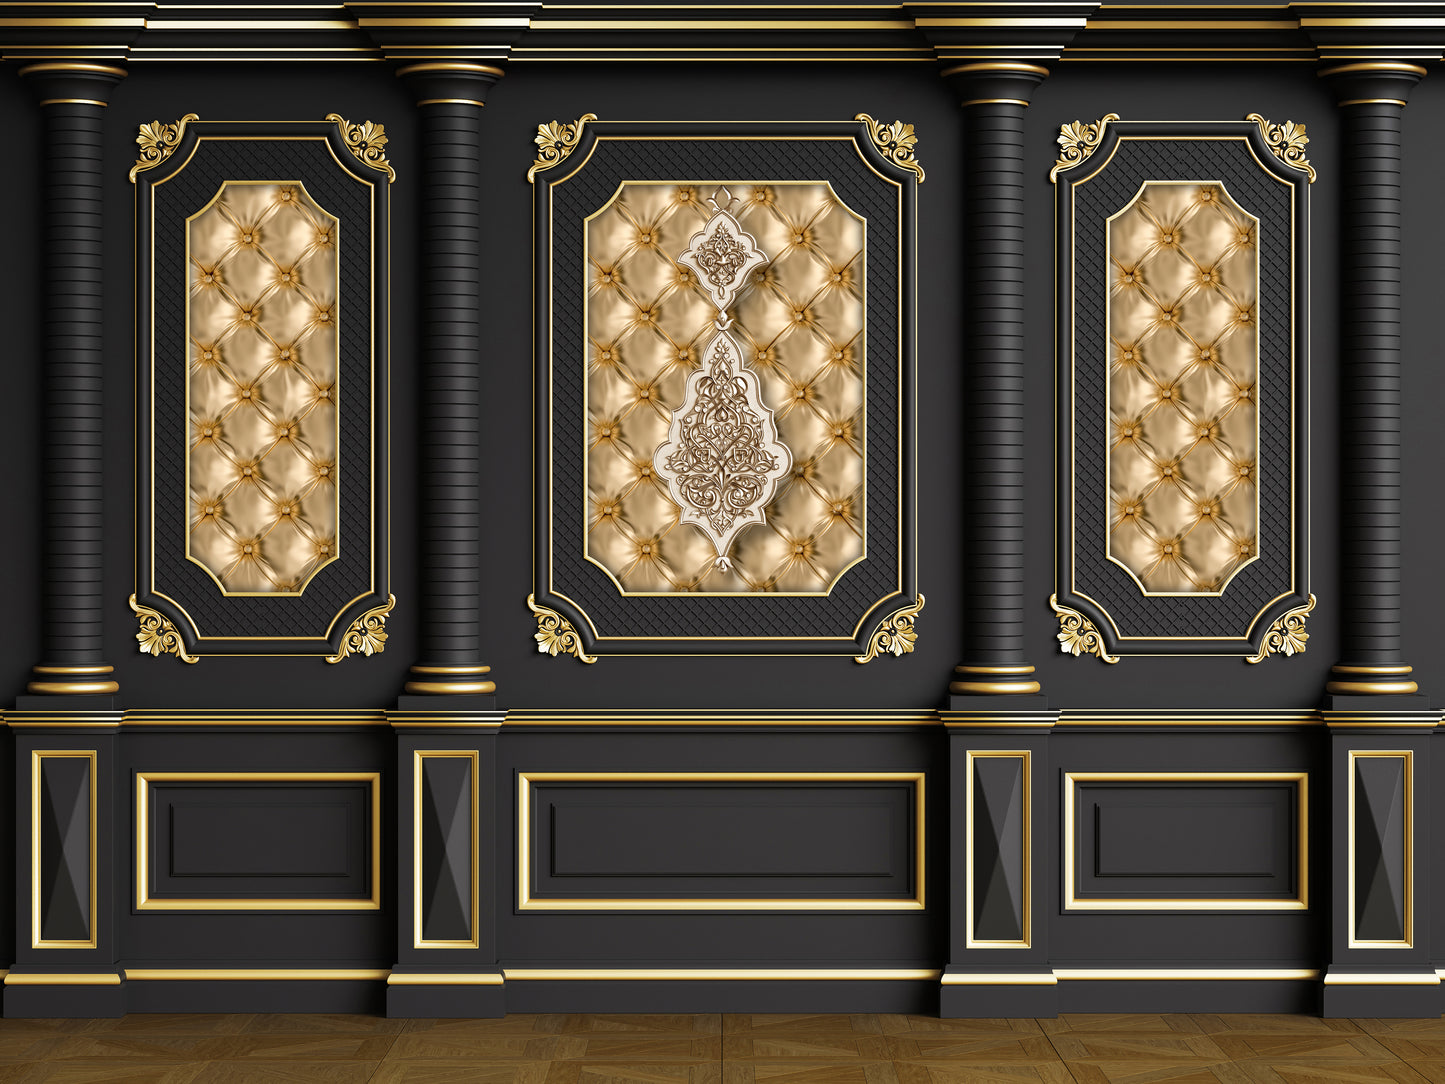 wallpaper 3d classic wall with gold black panels with gold designs